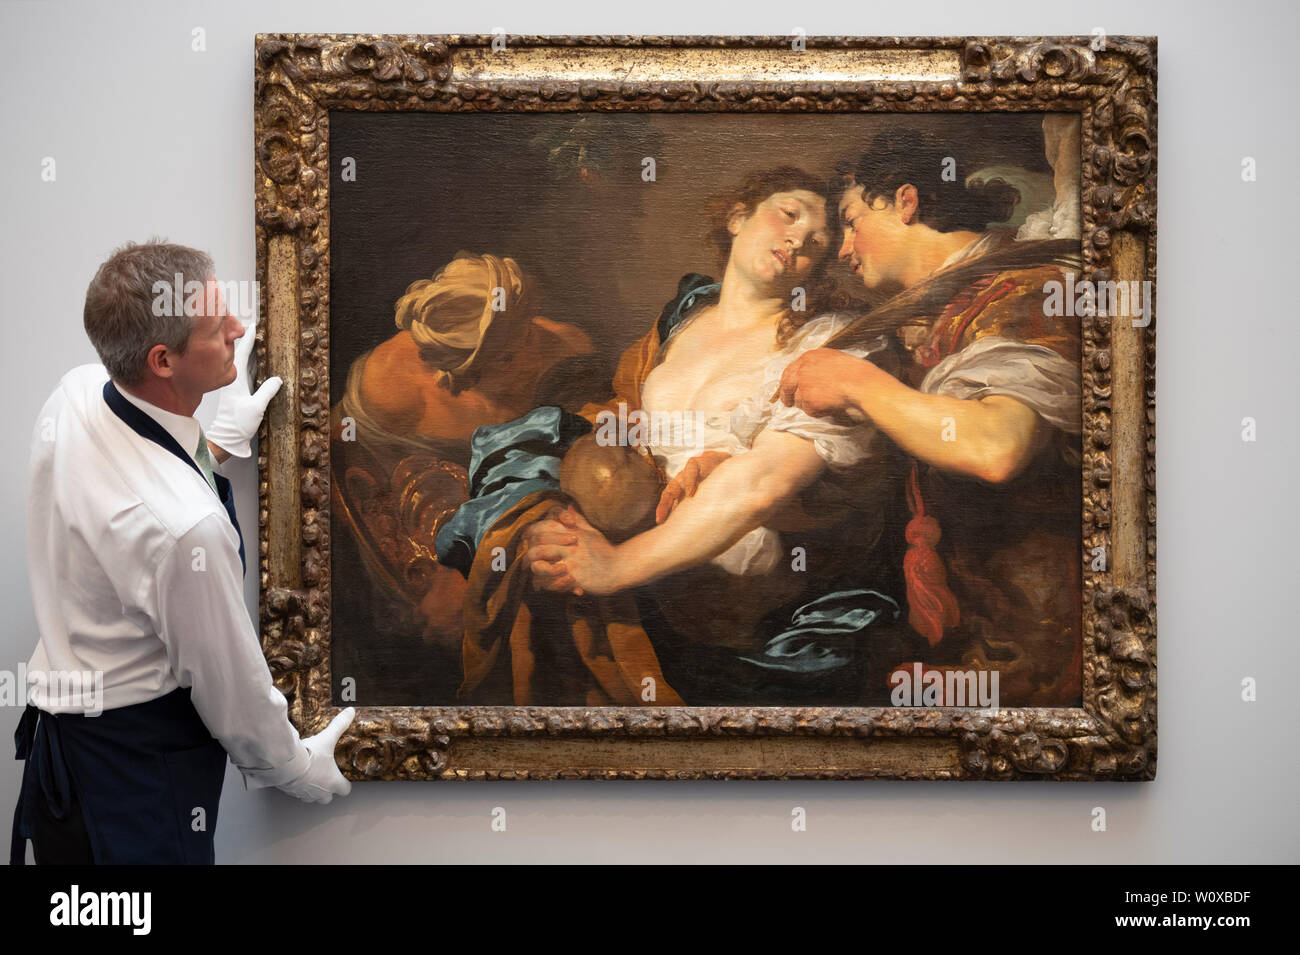 Sotheby’s, London, UK. 28th June 2019. Major works by Botticelli, Brueghel, Rubens and landscapes by Gainsborough, Turner and Constable in one of the most valuable Old Masters sales ever staged, to take place on 3 July 2019. Image: Johann Liss, The Temptation of Saint Mary Magdalene. Estimate £4-6 million. Credit: Malcolm Park/Alamy Live News. Stock Photo